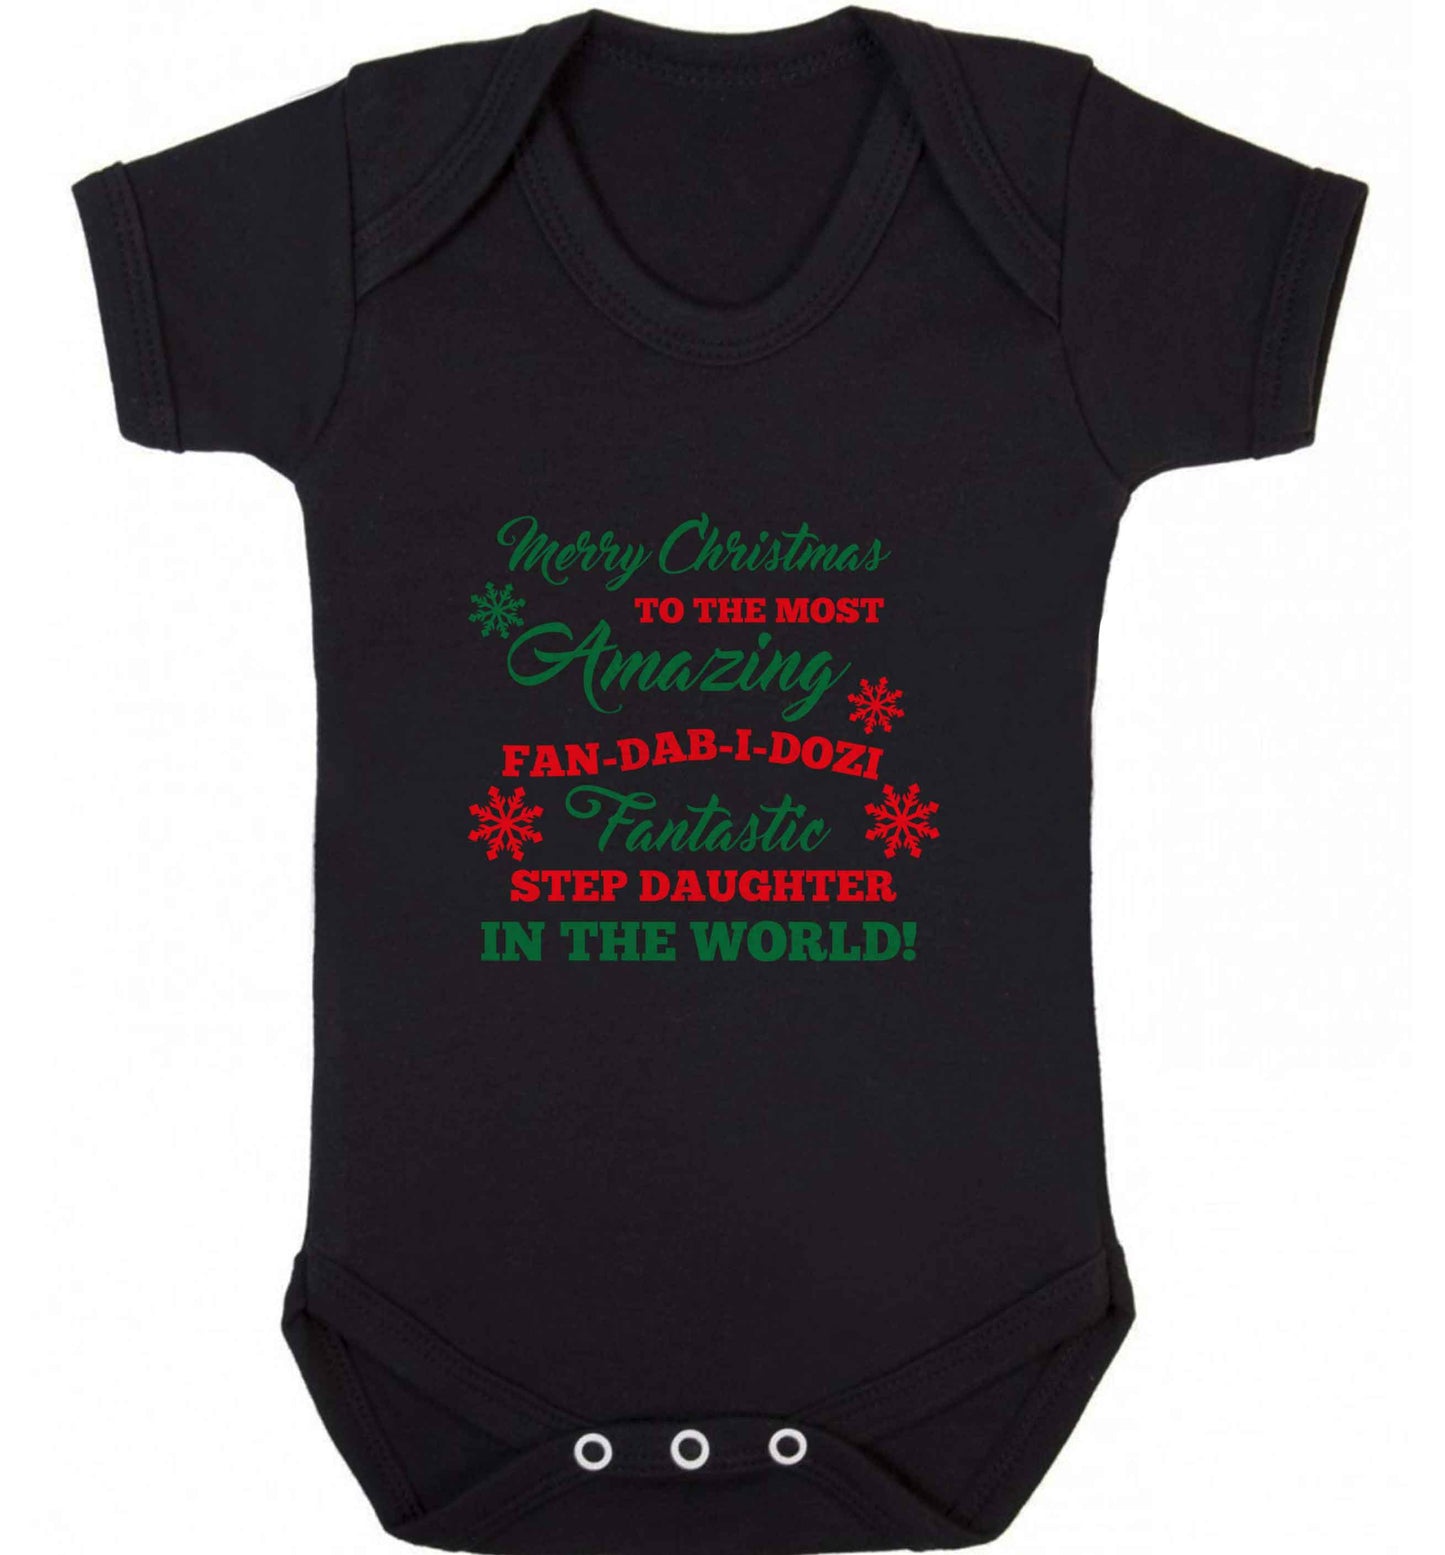 Merry Christmas to the most amazing fan-dab-i-dozi fantasic Step Daughter in the world baby vest black 18-24 months